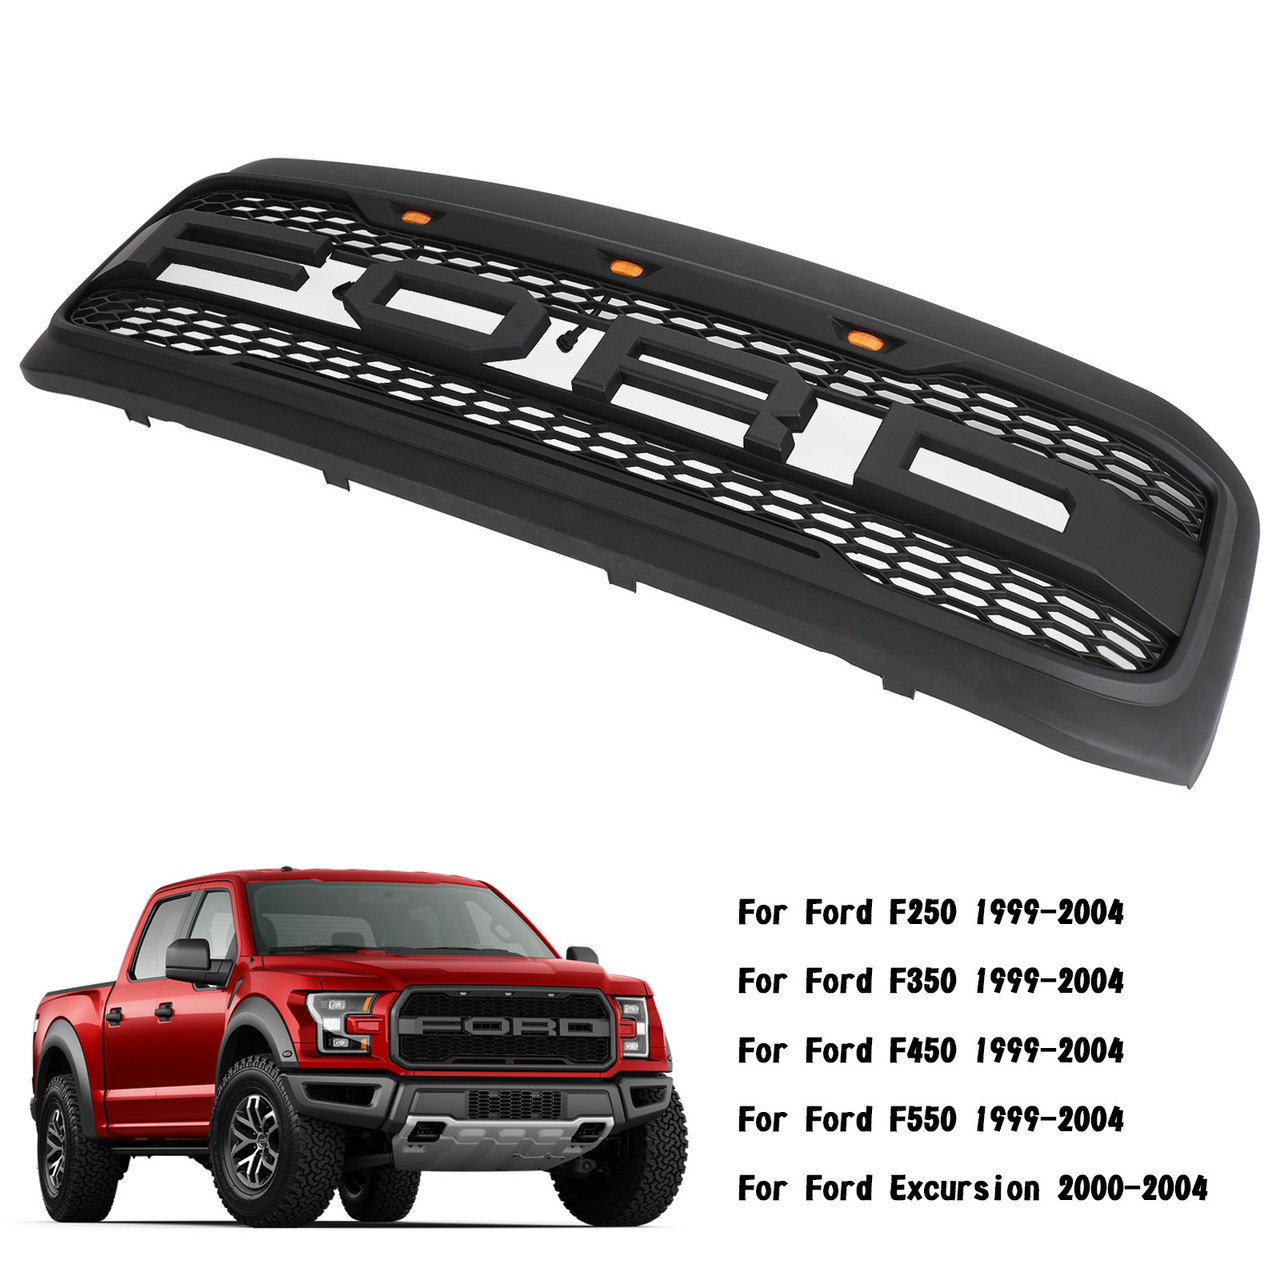 FO1200362 Raptor Style Grille Grill Fit for Ford F250 F350 F450 F550 1999-2004 Excursion 2000-2004 Super Duty